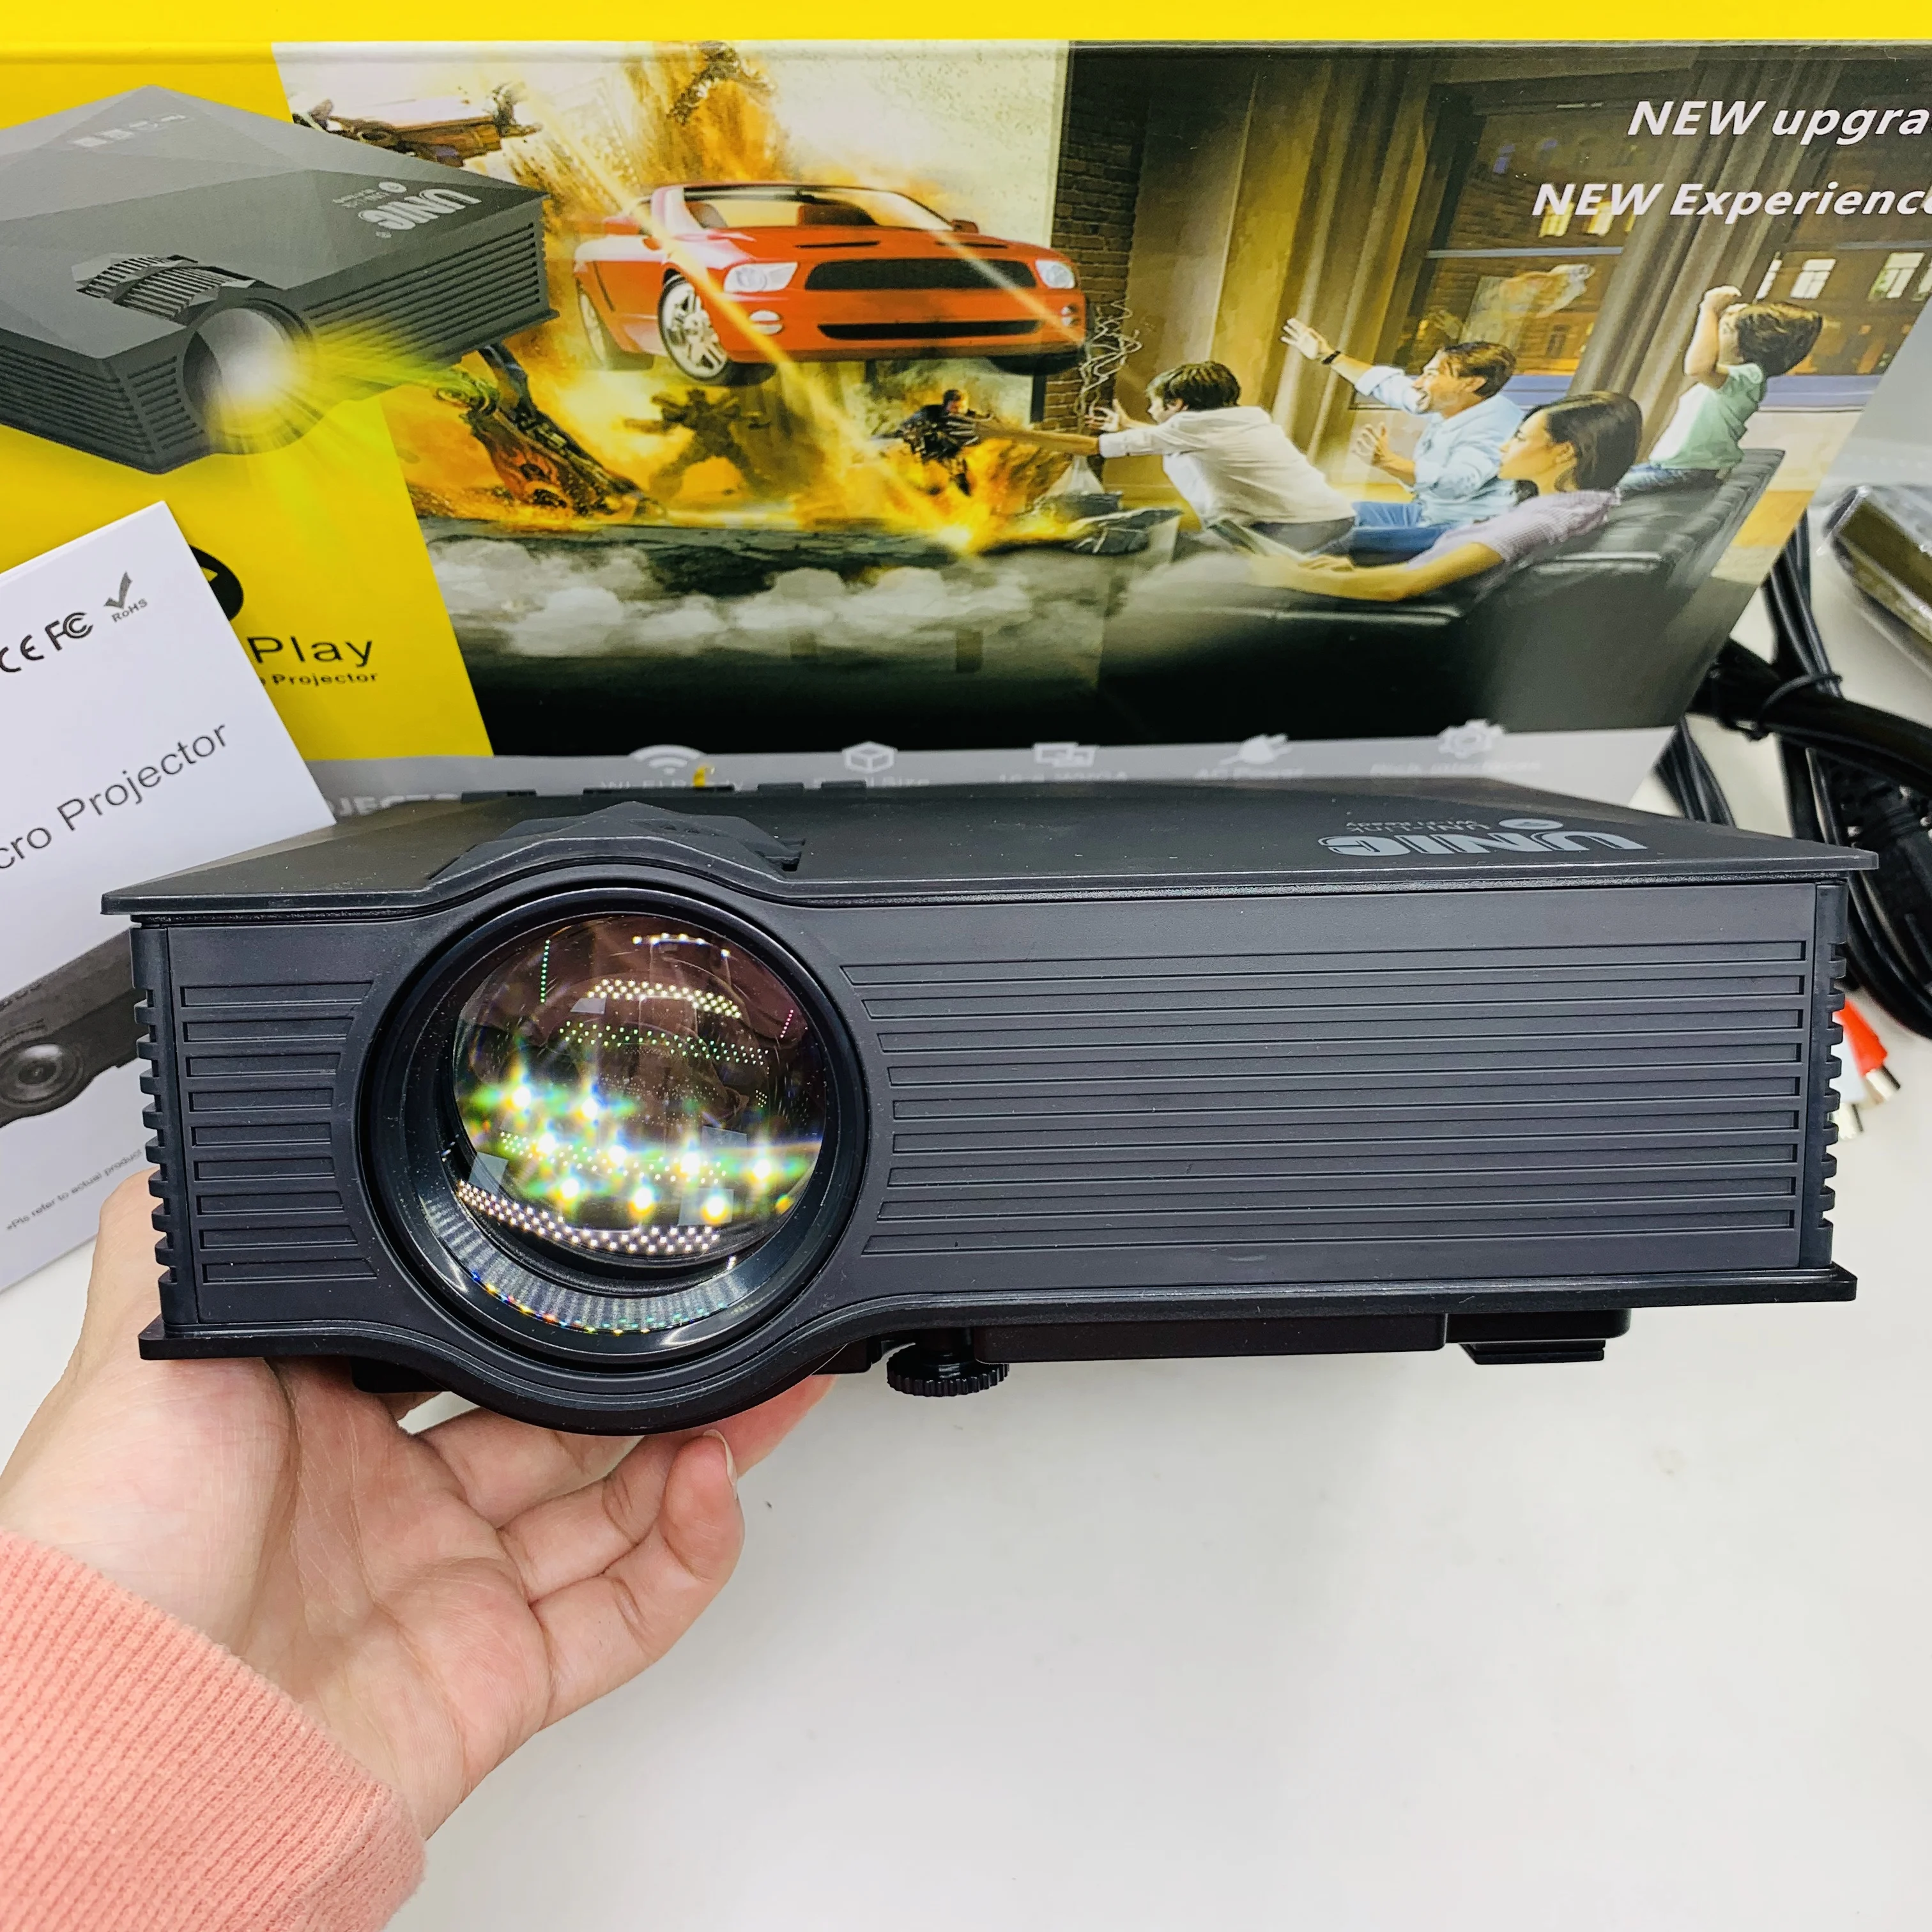 fe repentinamente Acuoso Más Barato 4k Inalámbrico Portátil Proyector Móvil Inteligente Android Led  Proyector Wifi - Buy Wifi Led Mini Proyector,Led Proyector Android,4k  Inalámbrico Portátil Proyector Product on Alibaba.com